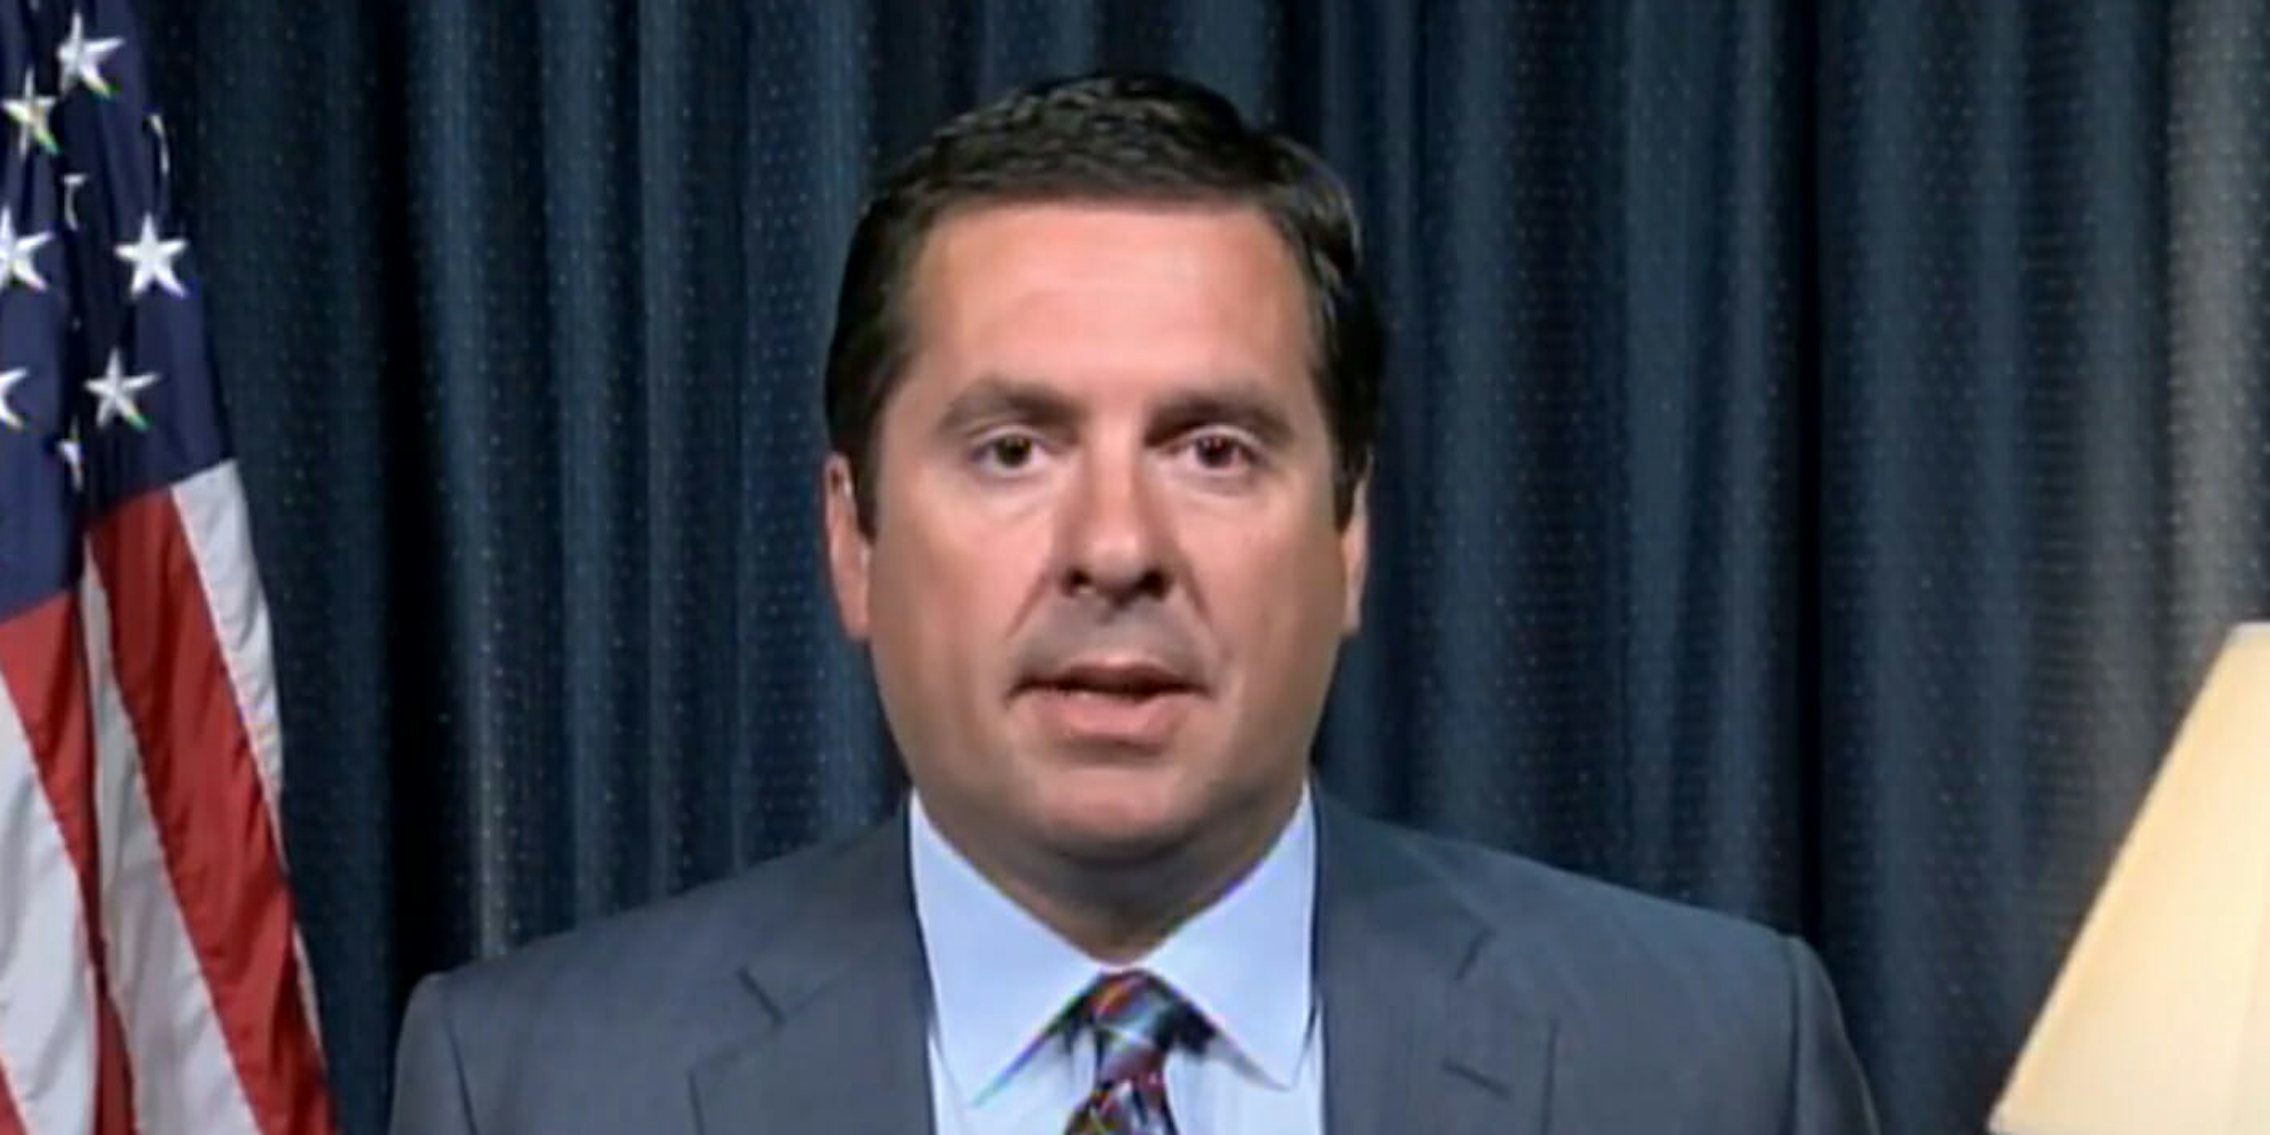 Rep. Devin Nunes (R-Calif.) and his controversial FISA memo are facing some extreme push back.